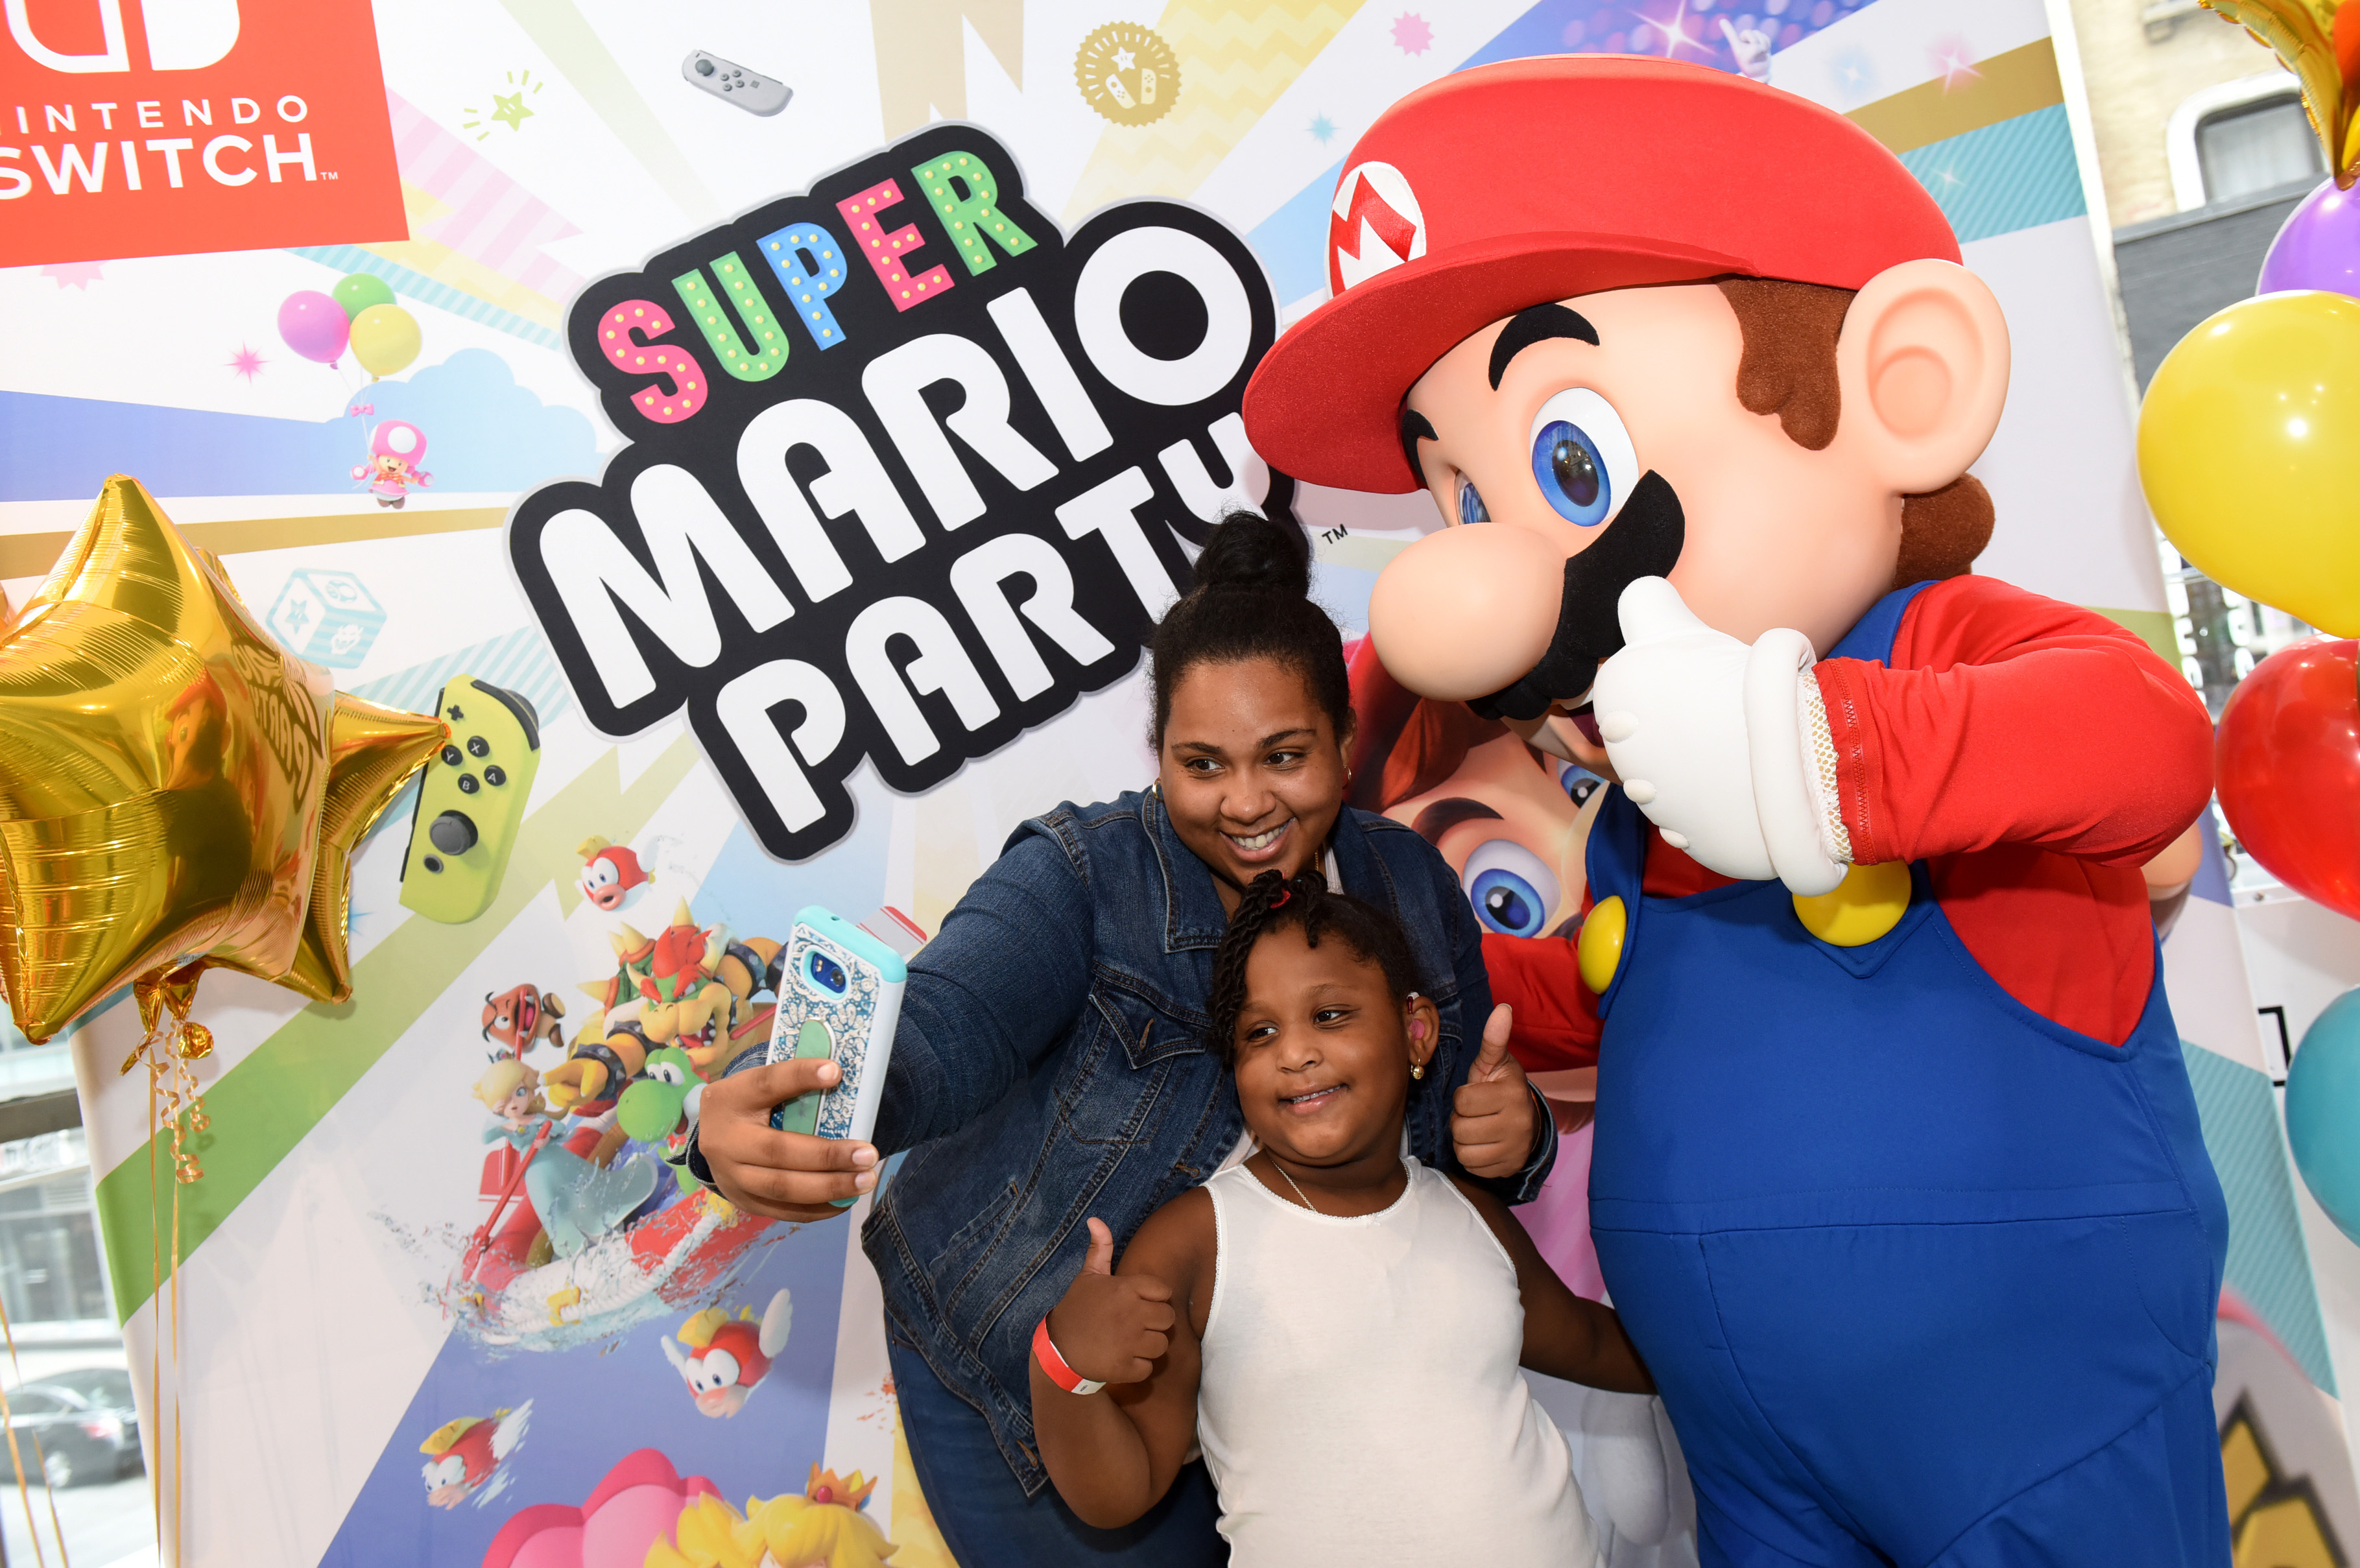 Photos of the Super Mario Party and Luigi's Mansion Launch Event at Nintendo  NY Store Are Available on Business Wire's Website and the Associated Press  Photo Network